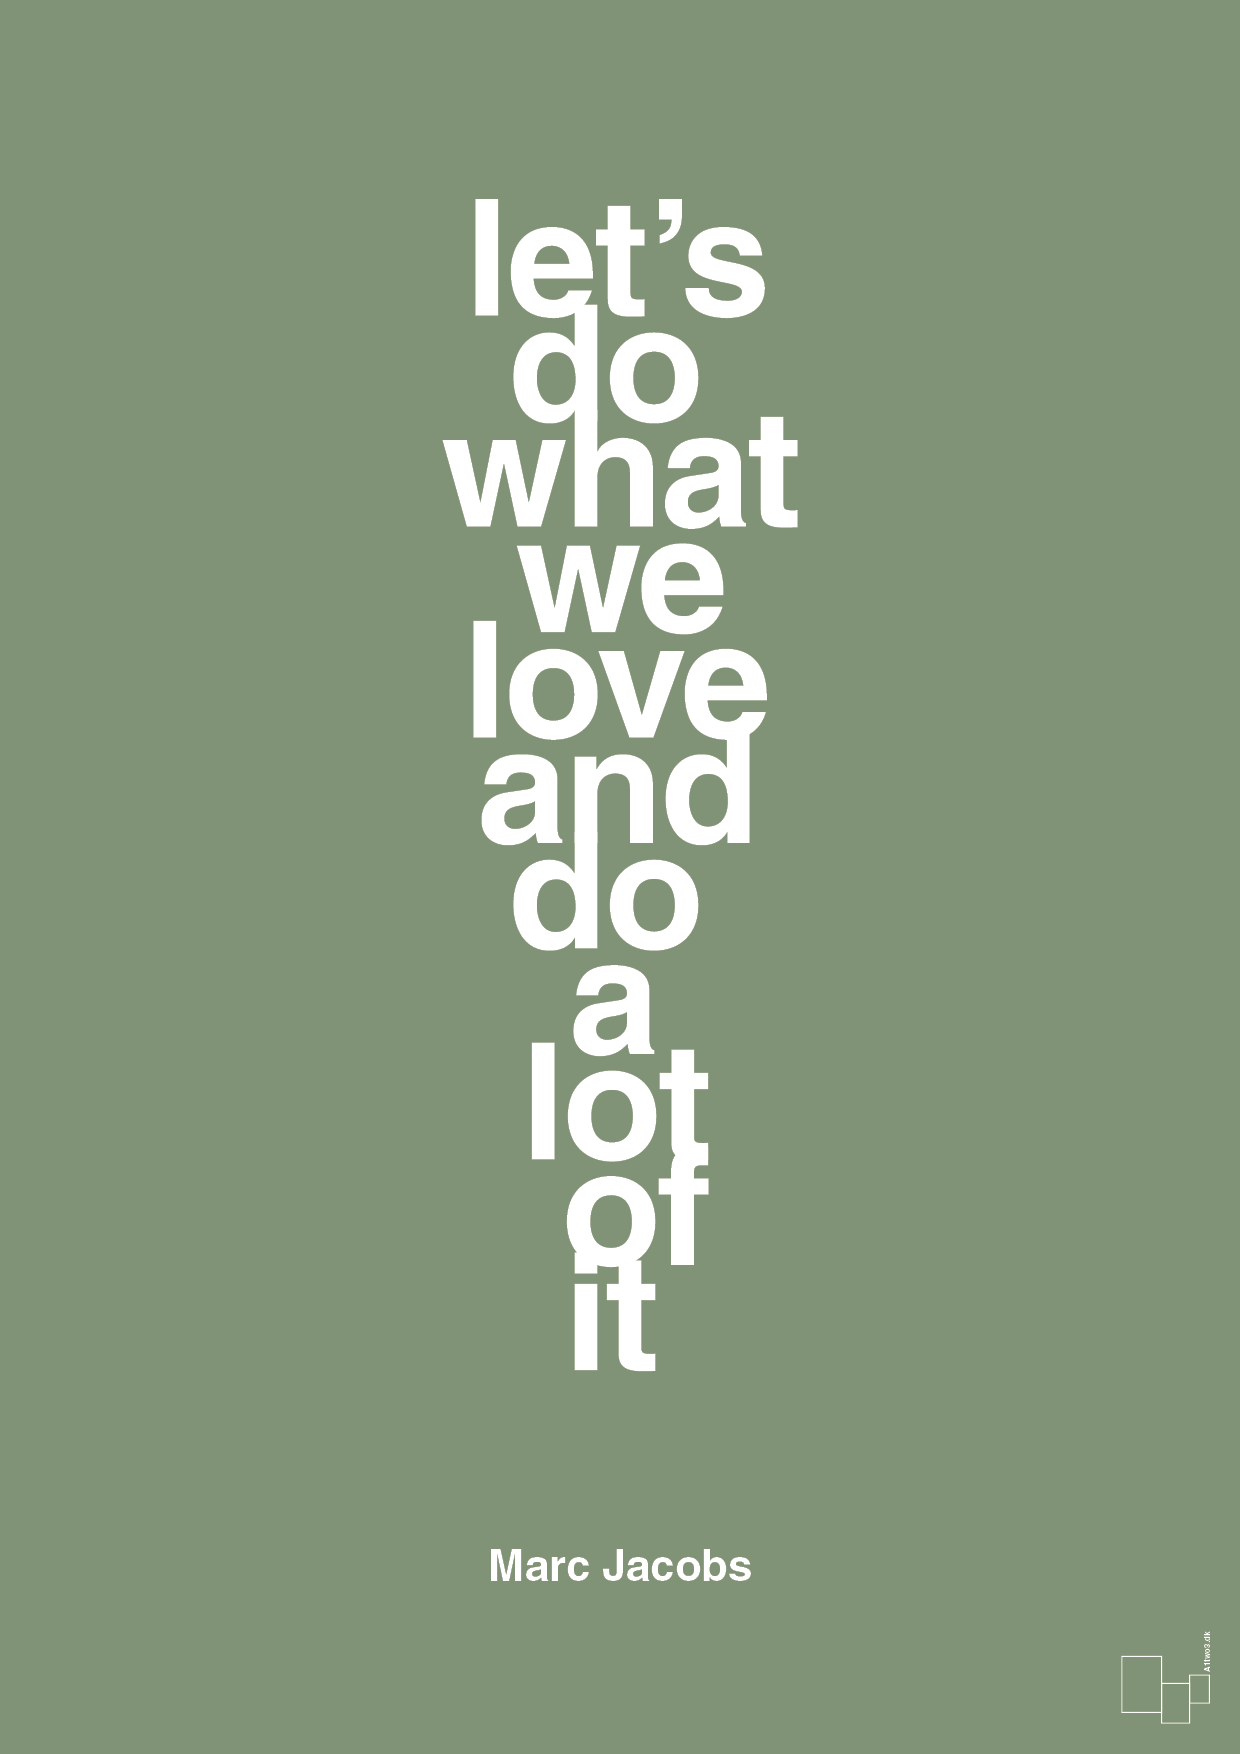 lets do what we love and do a lot of it - Plakat med Citater i Jade